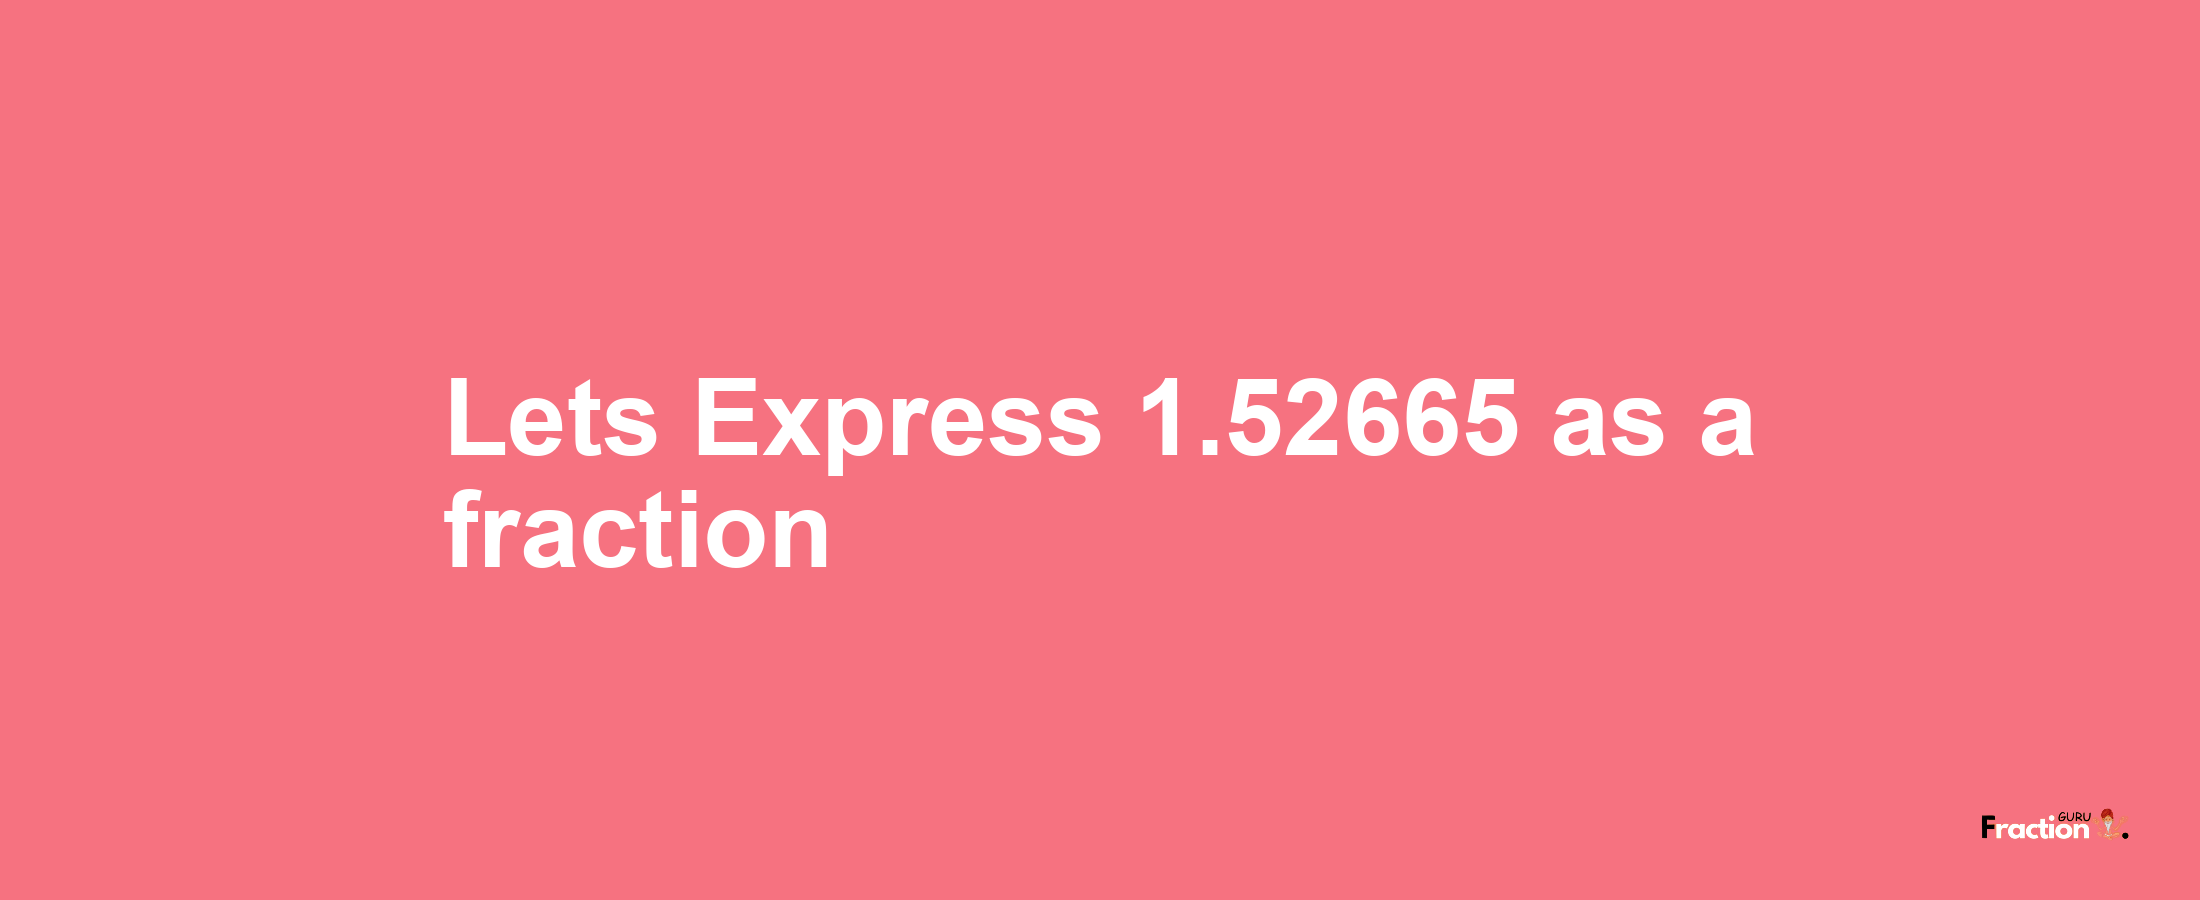 Lets Express 1.52665 as afraction